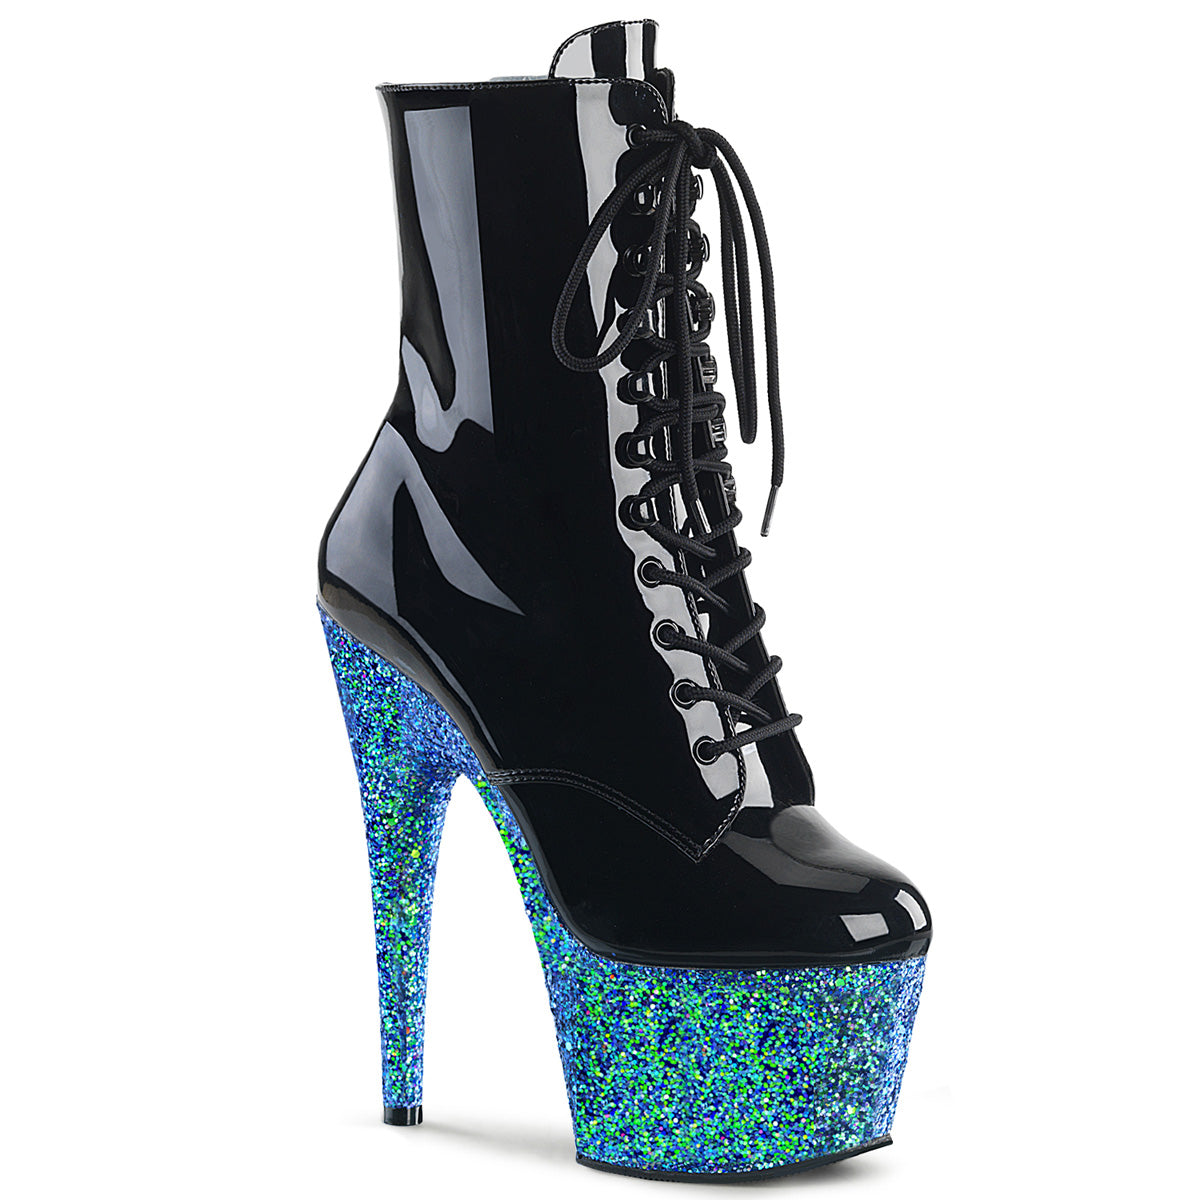 Pleaser Womens Ankle Boots ADORE-1020LG Blk Pat/Blue Multi Glitter